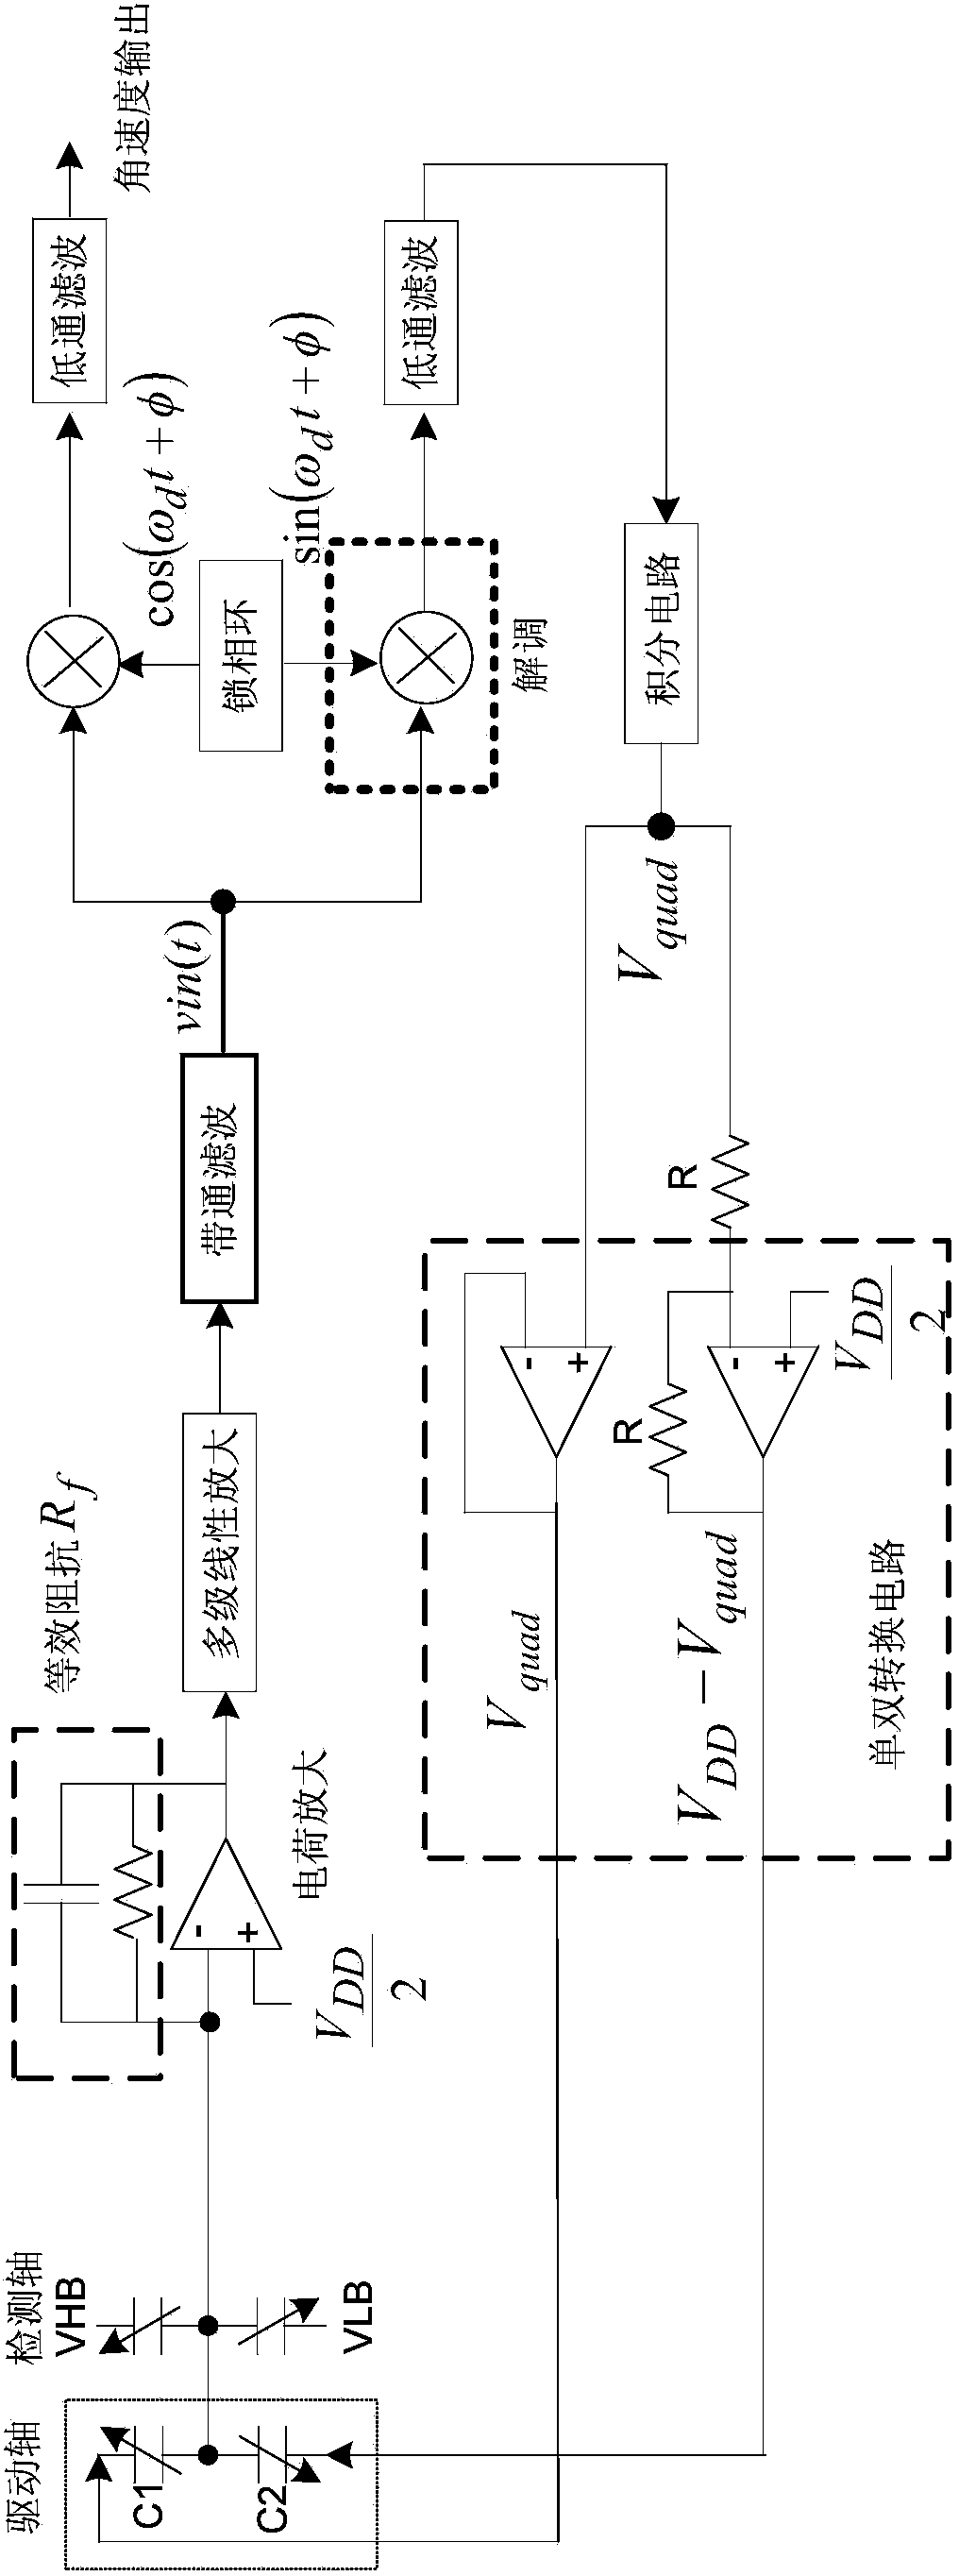 Quadrature error closed-loop compensating circuit for vibrating type silicon micromechanical gyroscope